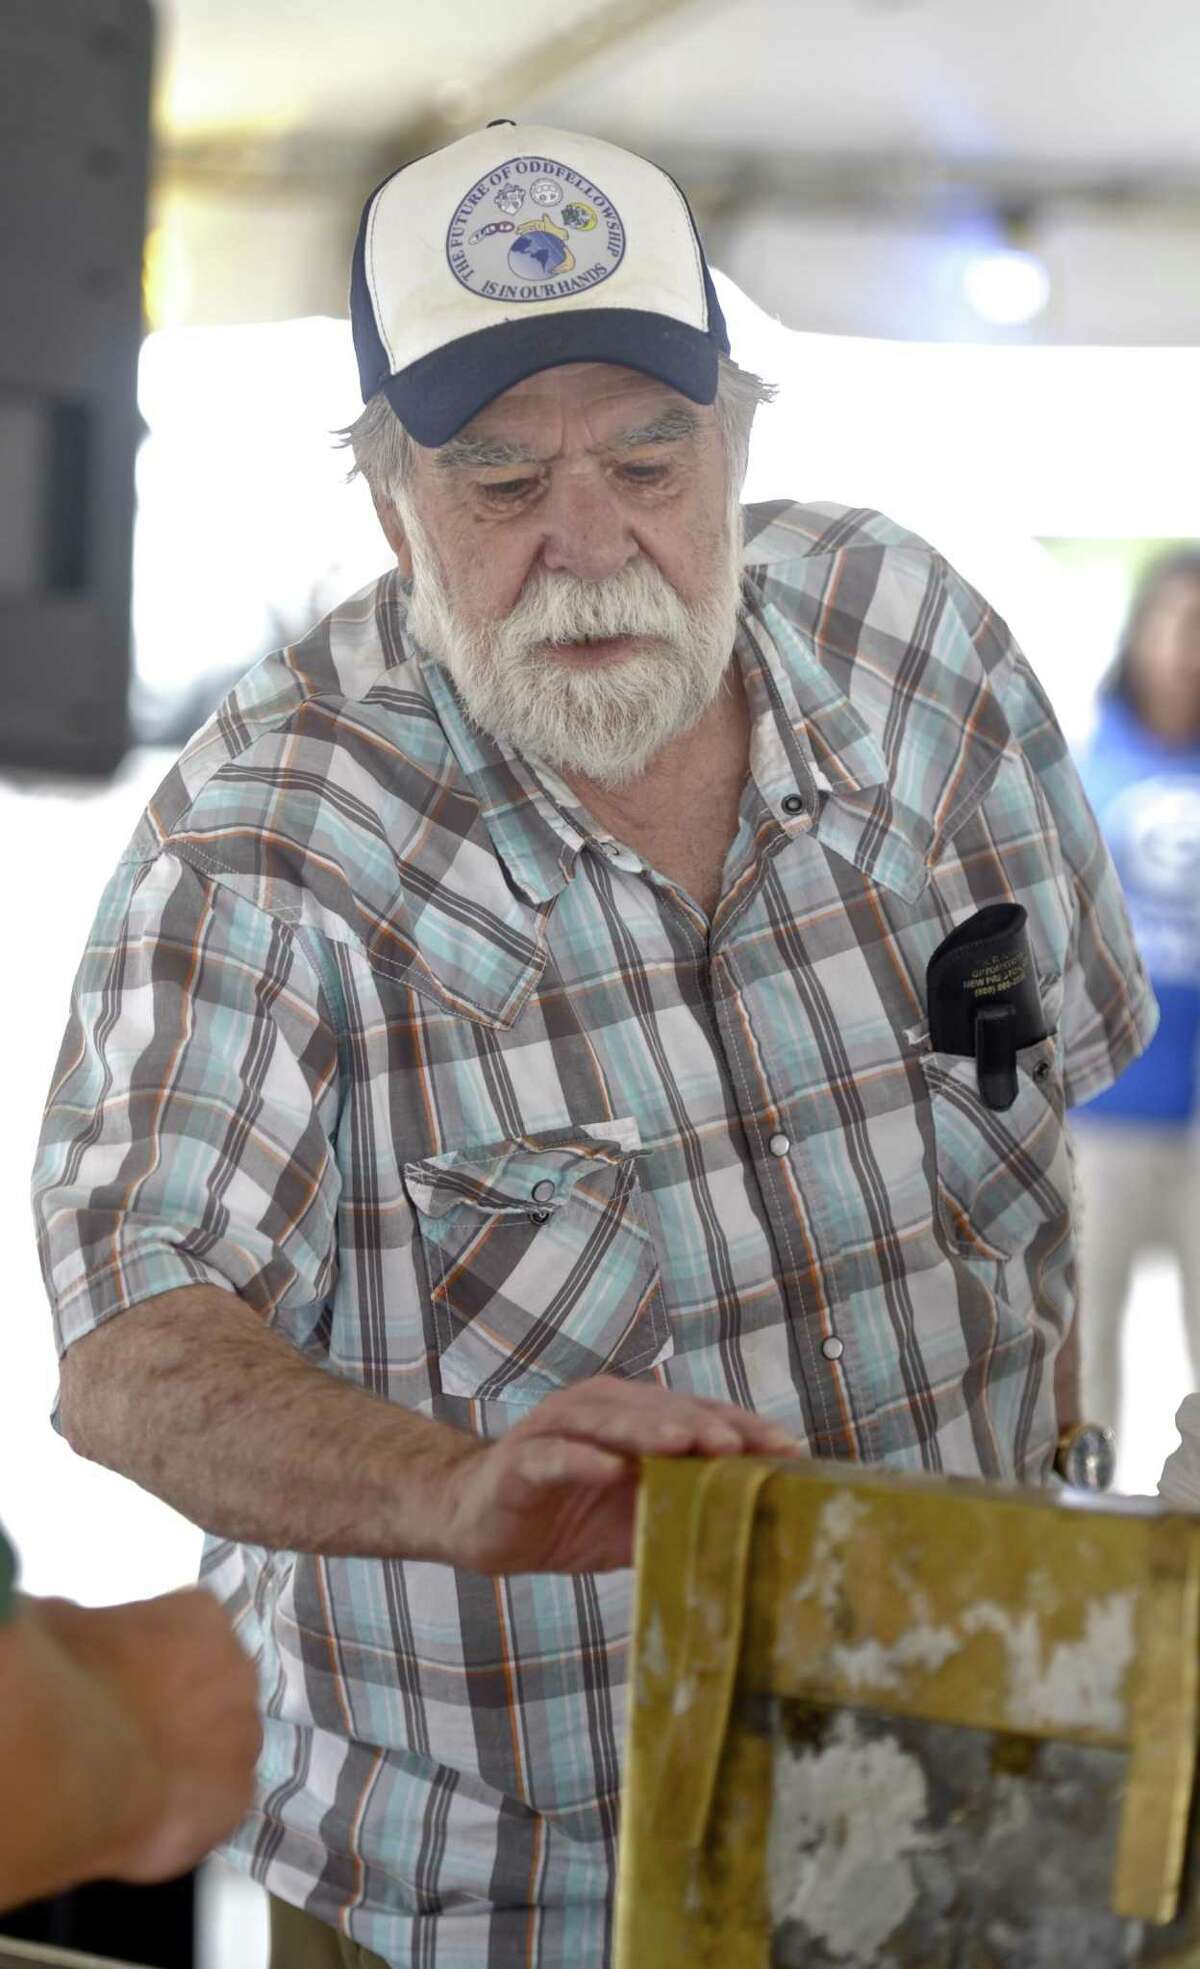 Warren Smith, of New Milford, touches a time capsule from the Scovill (Century Brass) building which was opened during the Village Fair Days in New Milford, on Saturday. Smith was working for Turner Construction, which built the building, and was present when the time capsule was placed in the building, he later worked for Scovill. July 29, 2017, in New Milford, Conn.